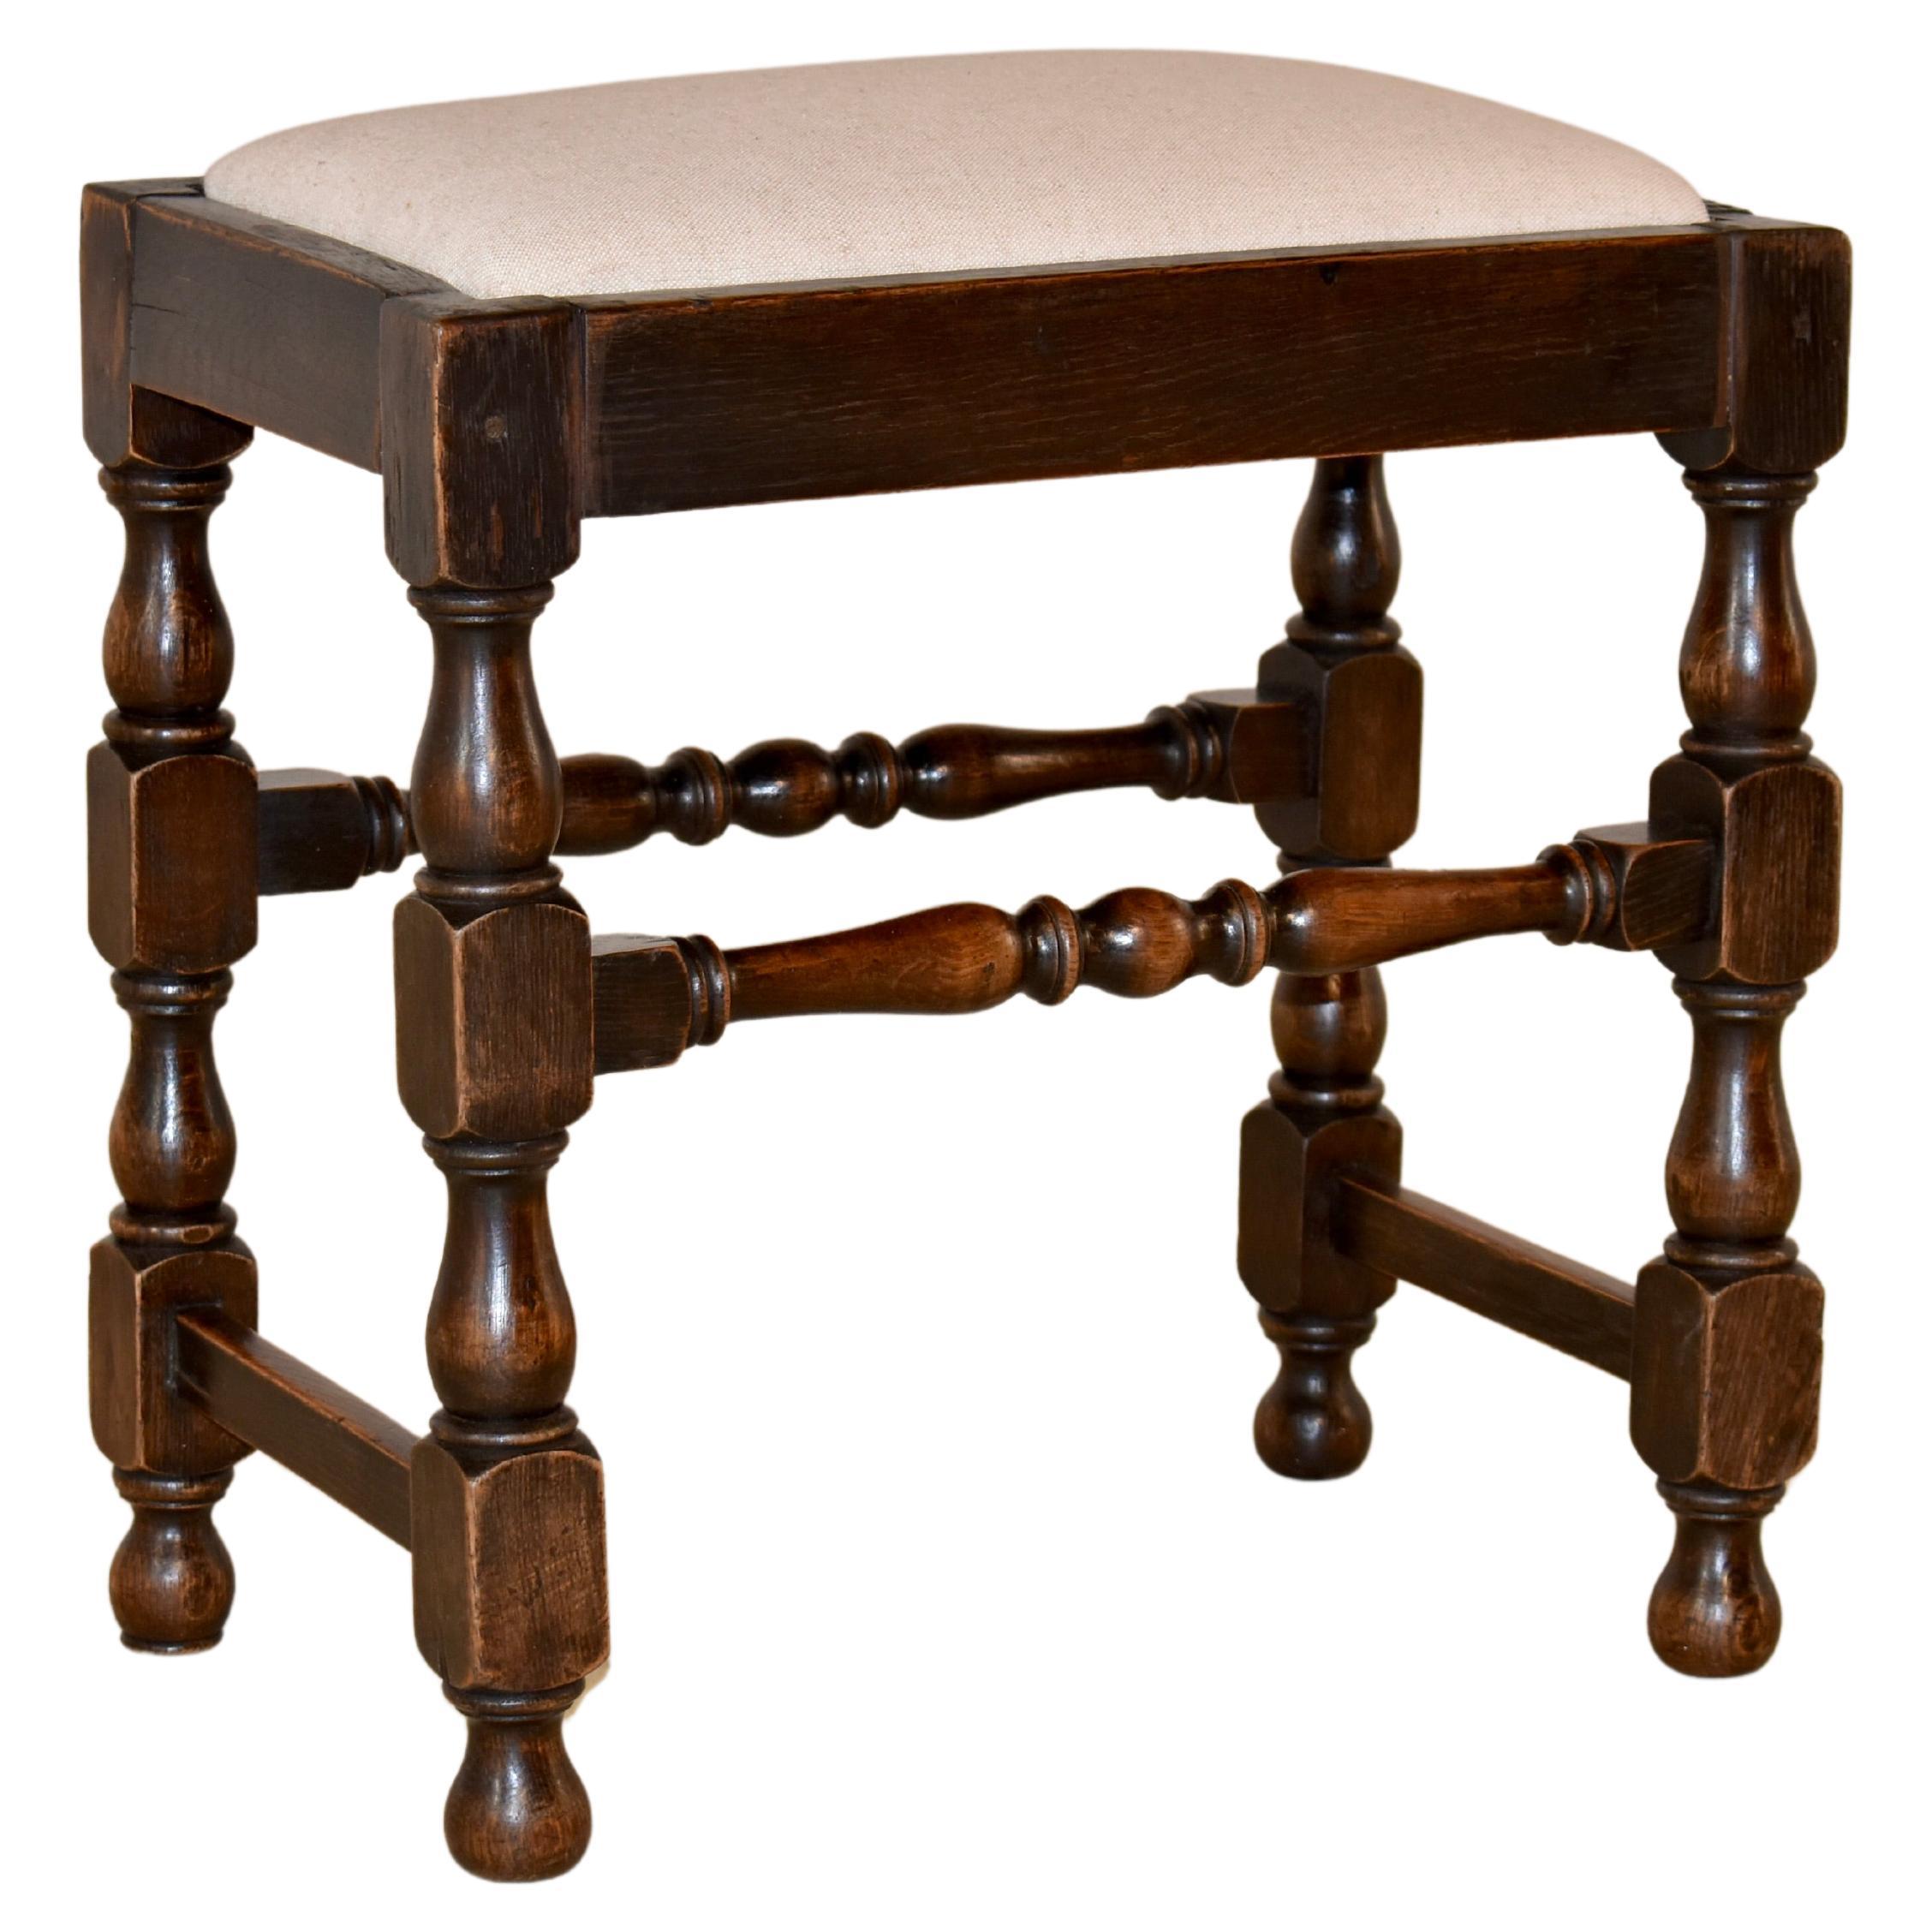 Early 19th Century Upholstered Stool